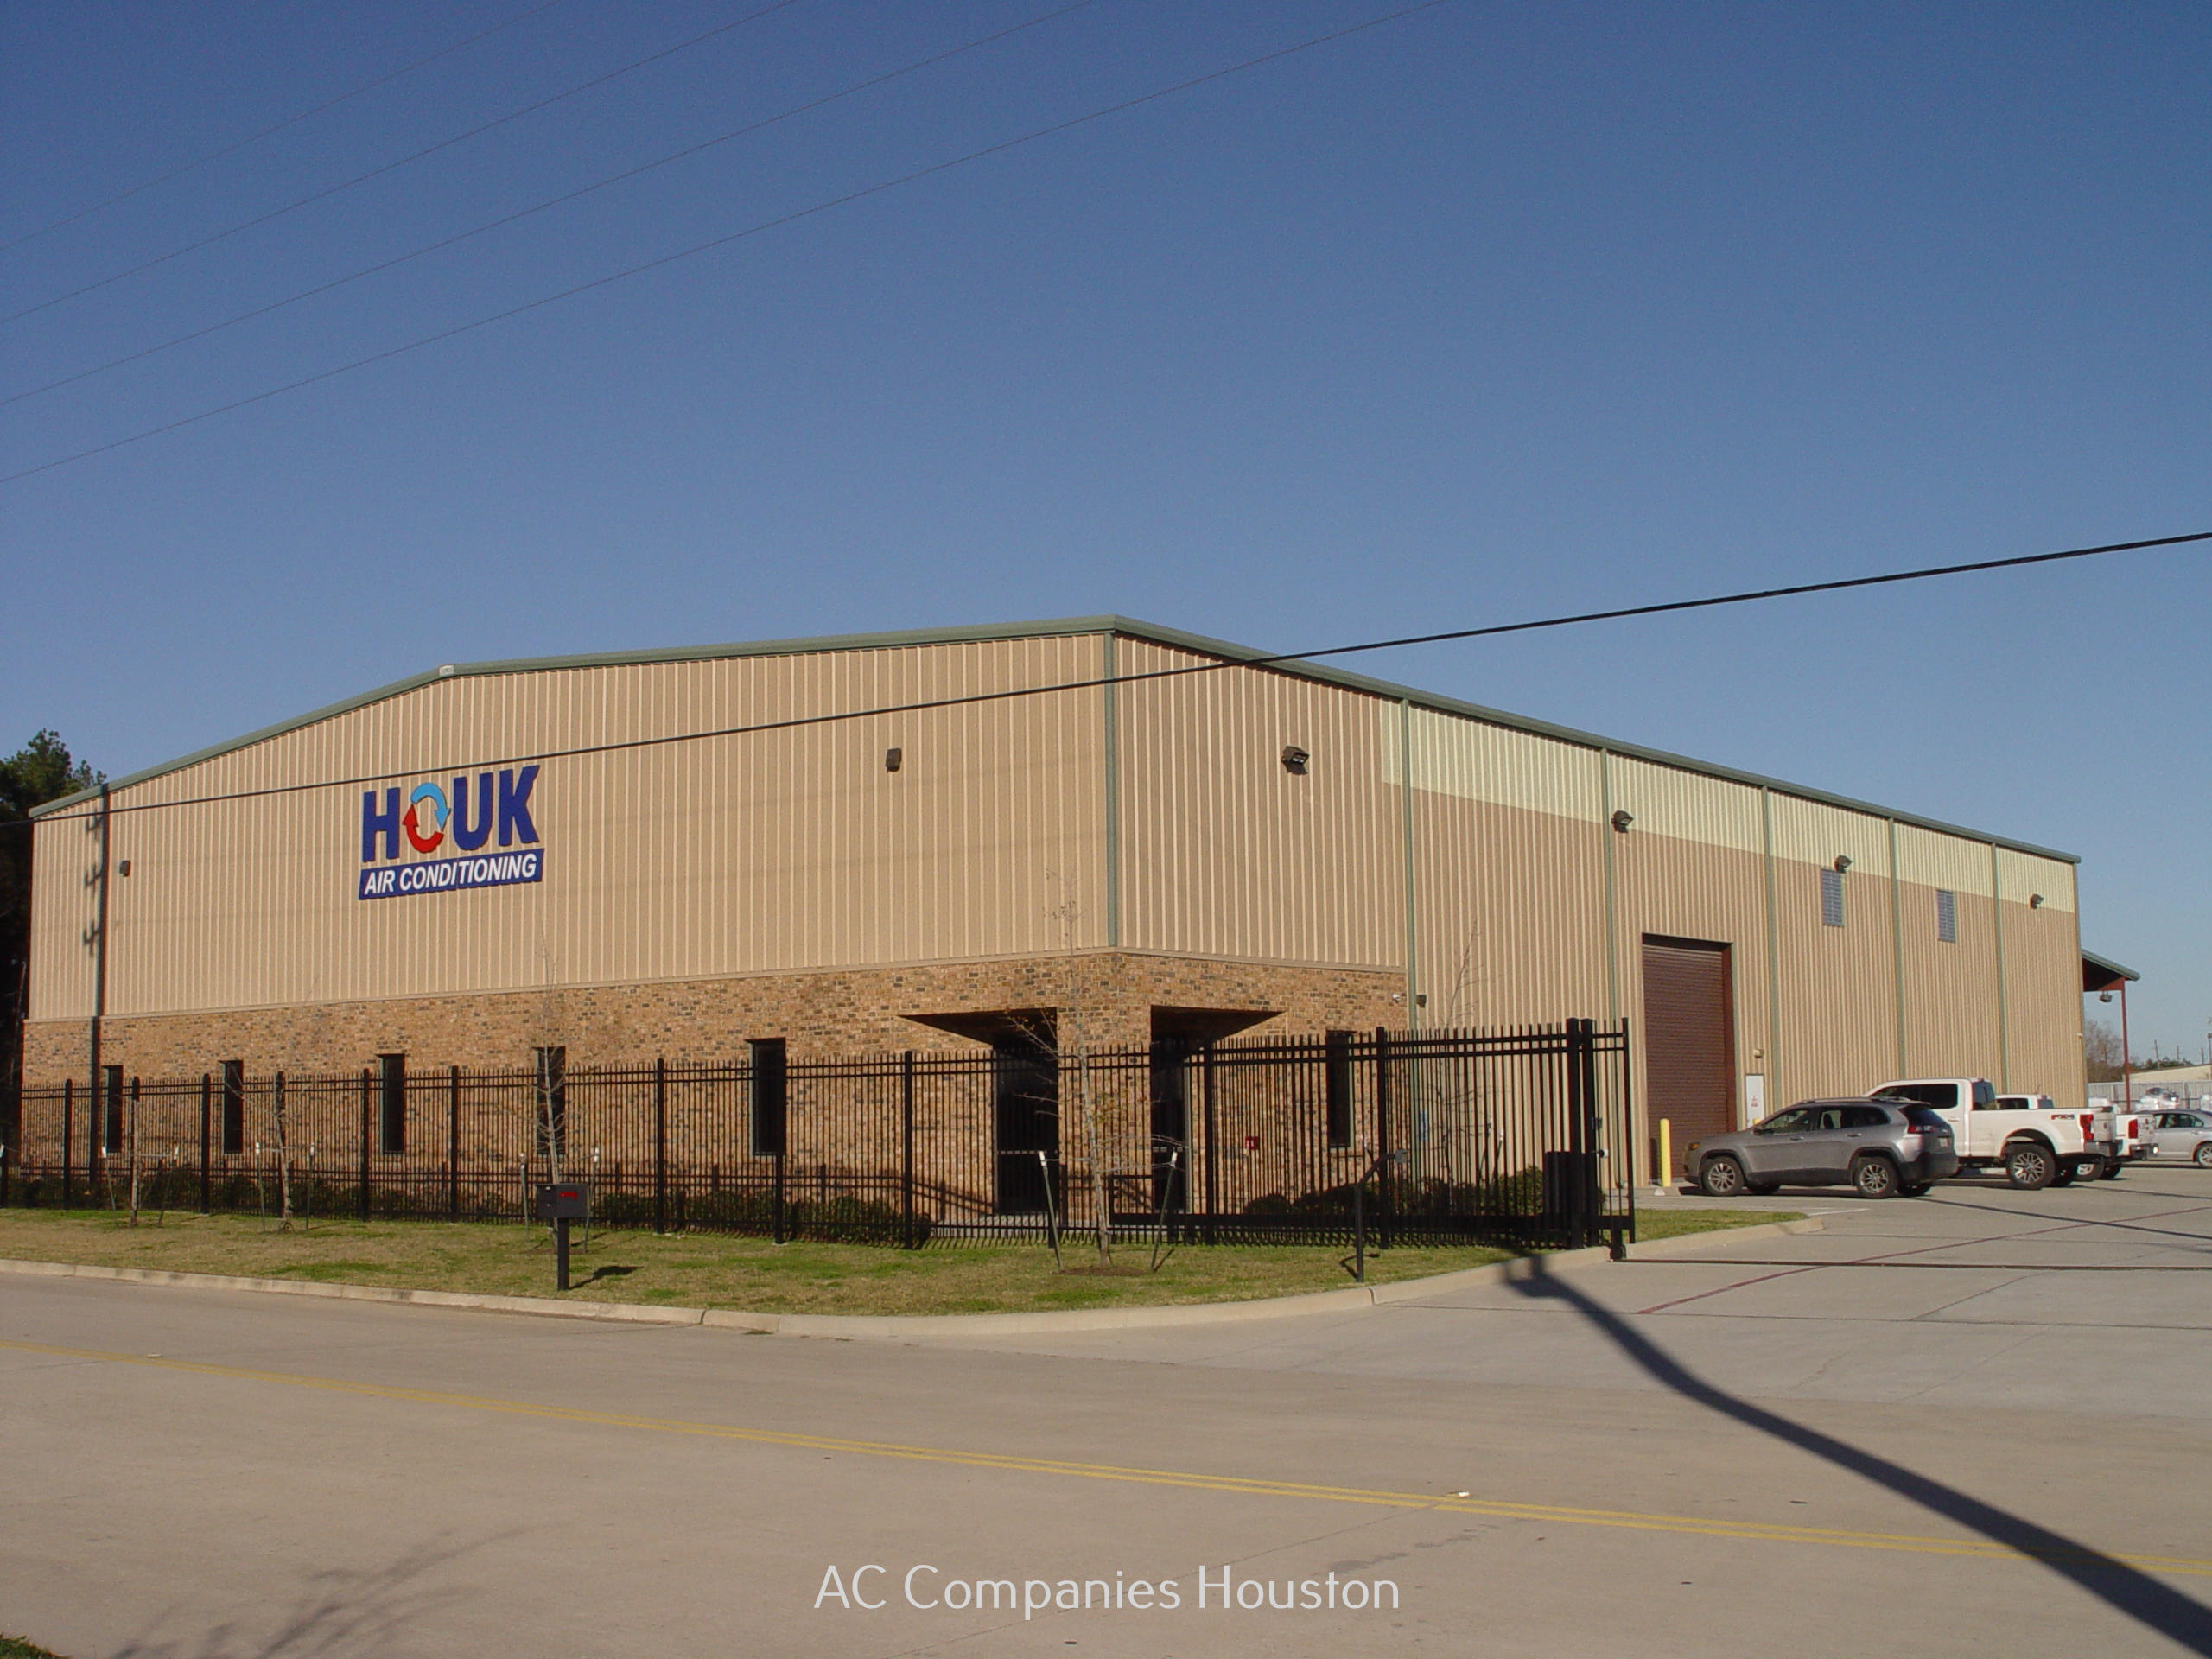 Houk Air Conditioning Houston Boasts of Being the Top Company for Heating and Cooling Services 